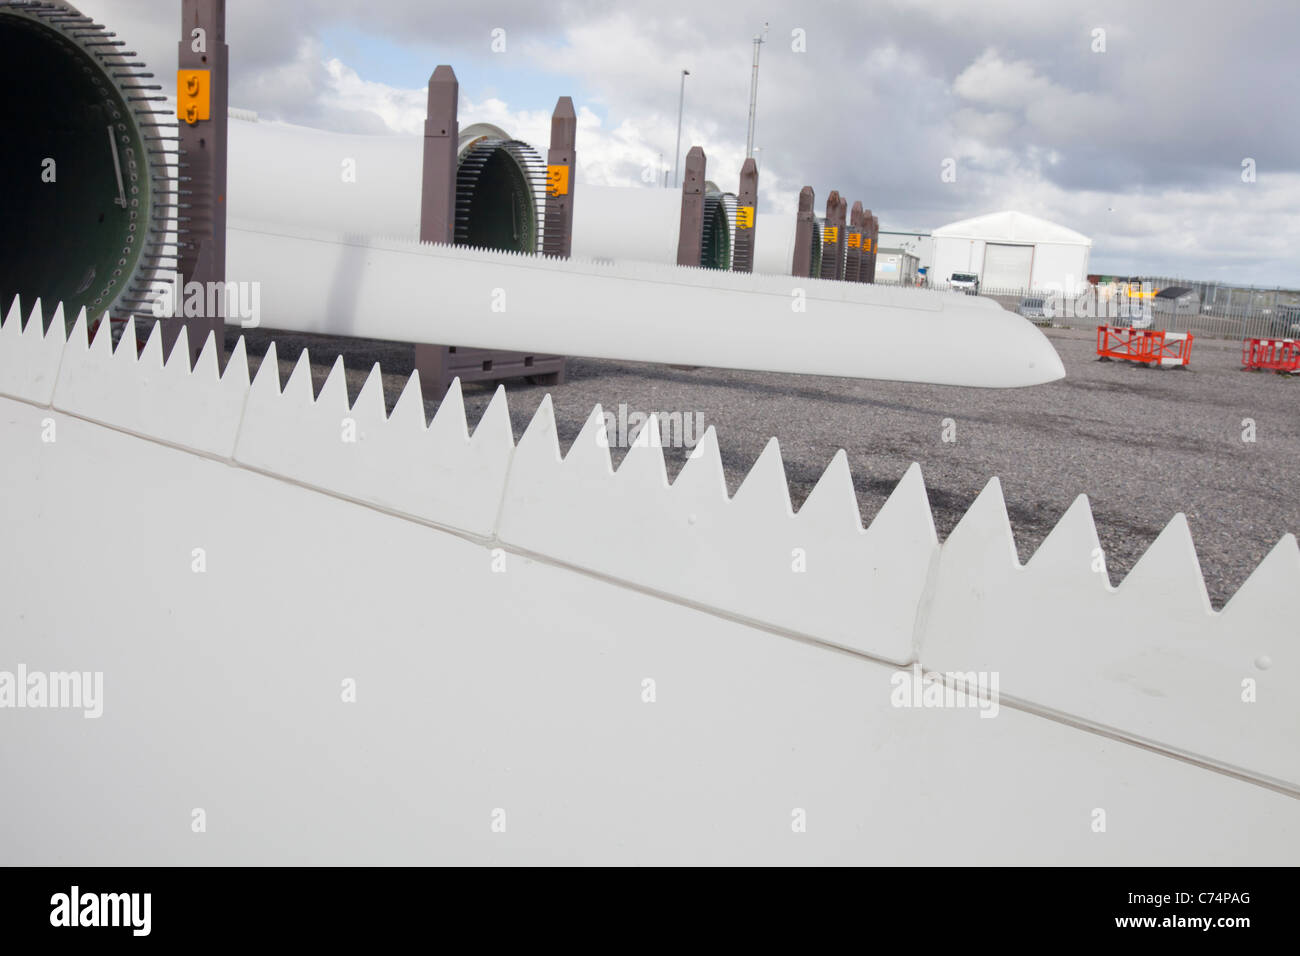 wind turbine blades with serrated edges to increase efficiency, on the docks at Mostyn, bound for the Walney offshore wind farm Stock Photo